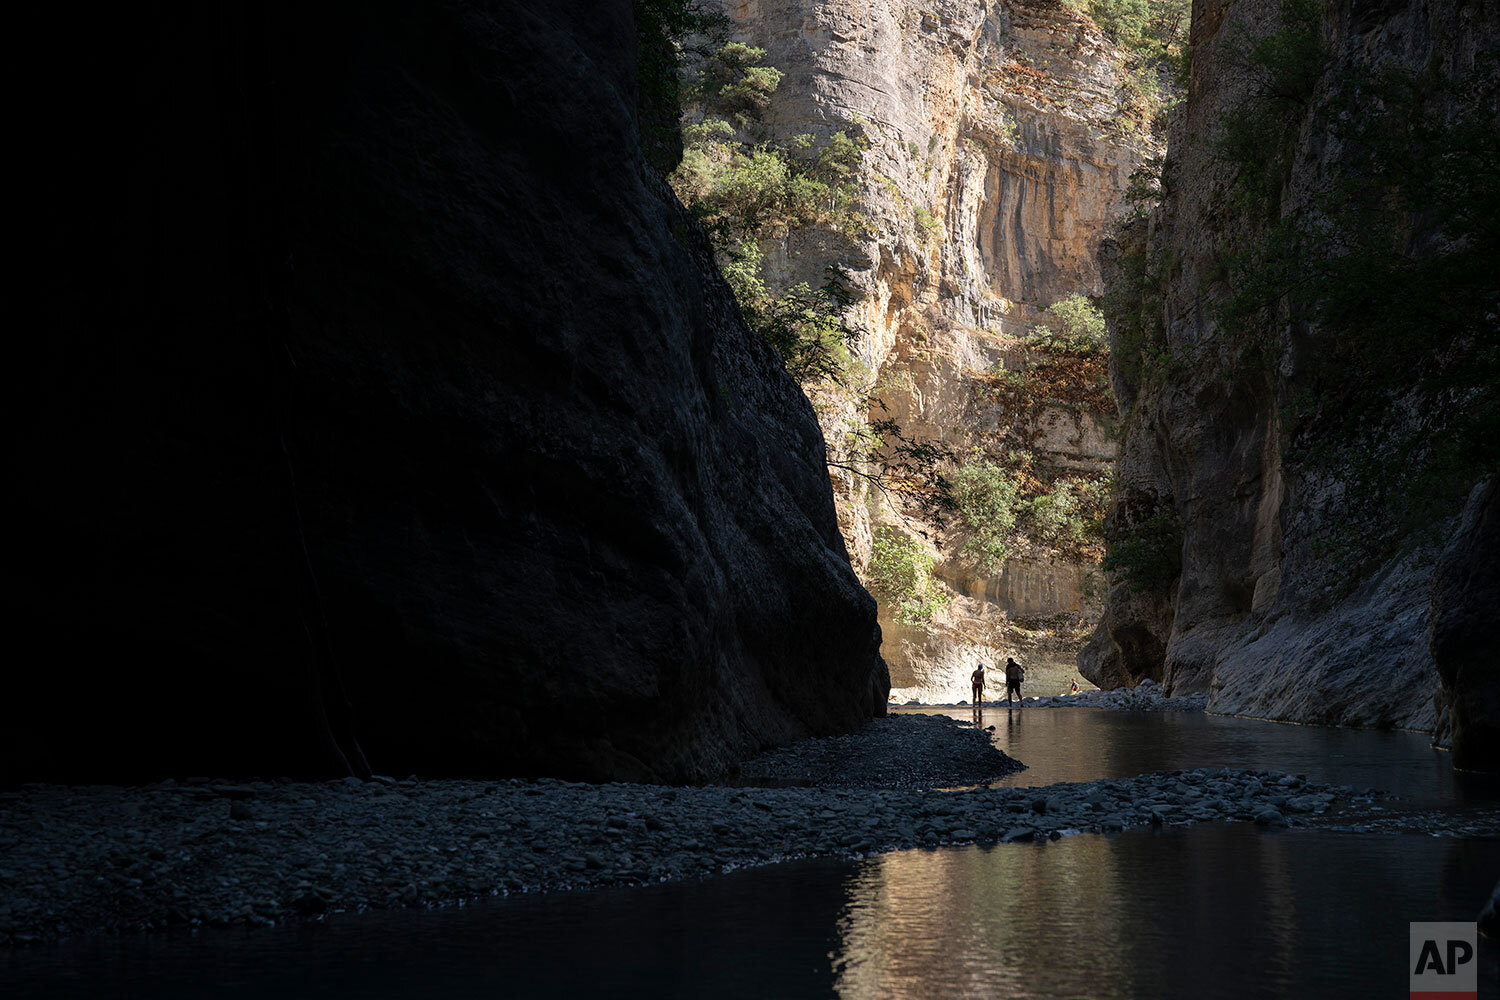  In this June 20, 2019 photo, people walk along the Langarica River, a tributary to the Vjosa near Permet, Albania. Albania's government has set in motion plans to dam the Vjosa and its tributaries to generate much-needed electricity for one of Europ